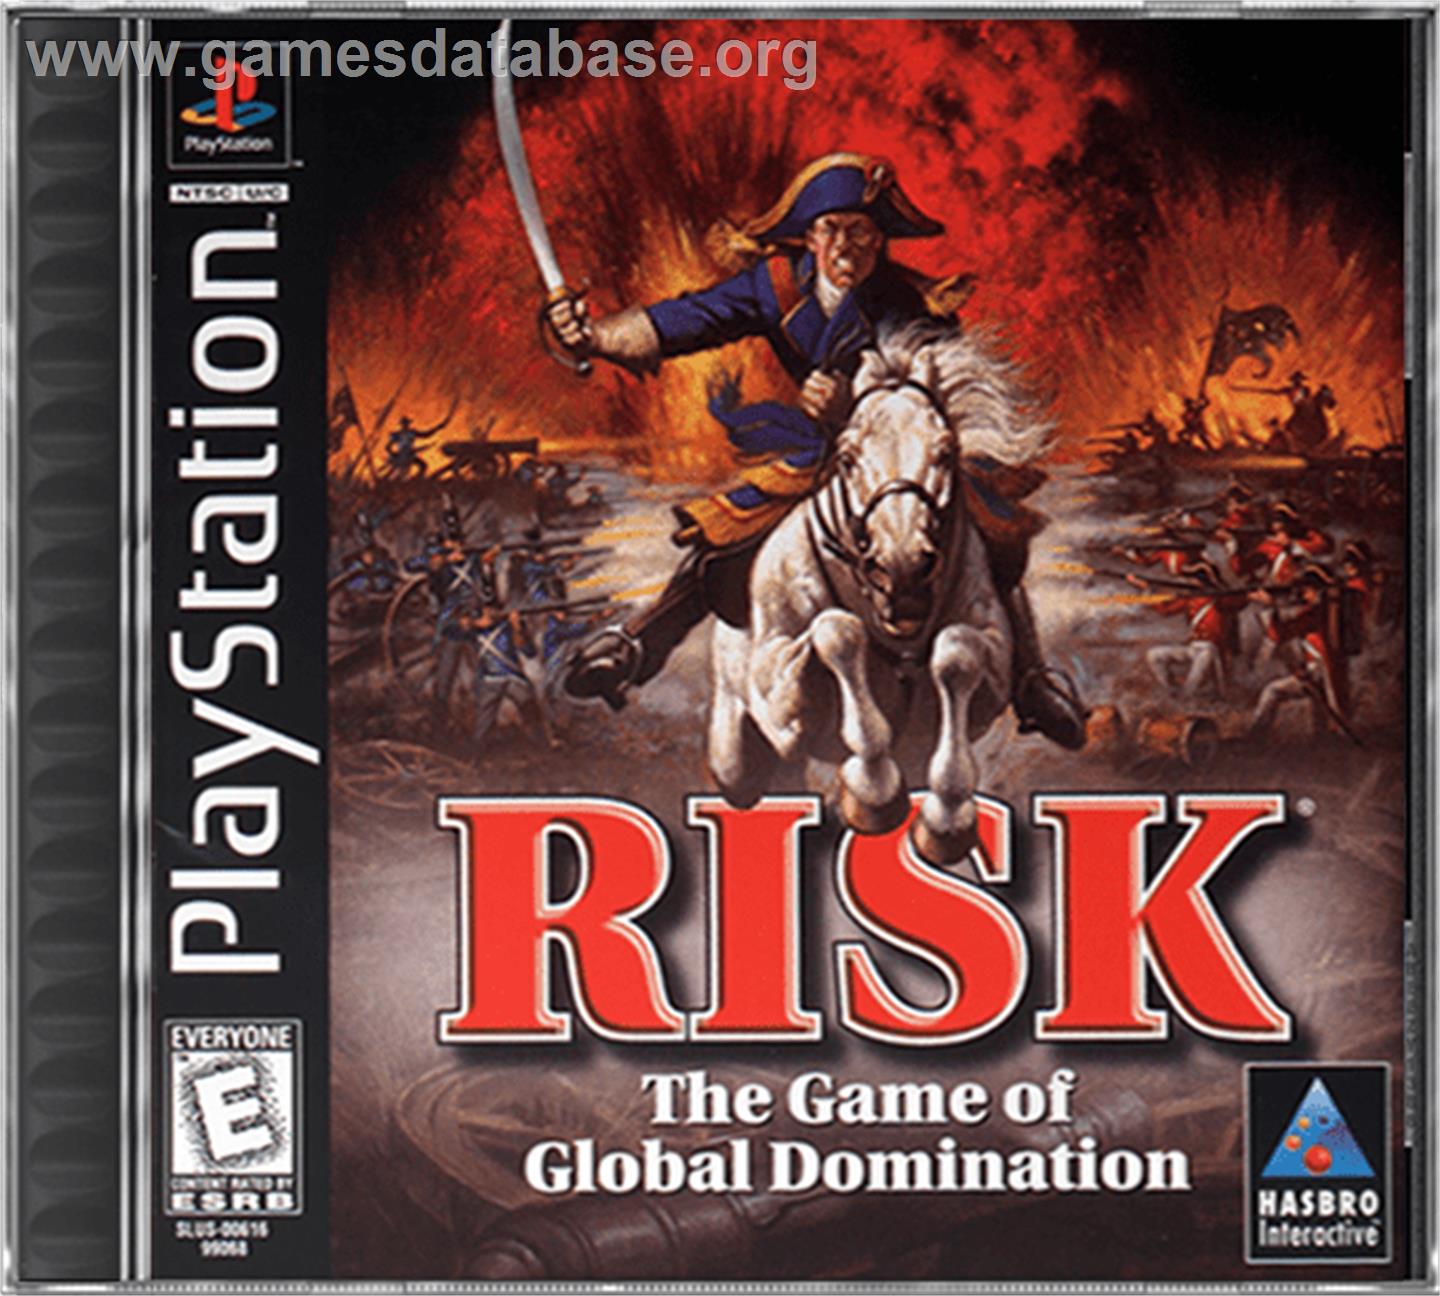 RISK: The Game of Global Domination - Sony Playstation - Artwork - Box